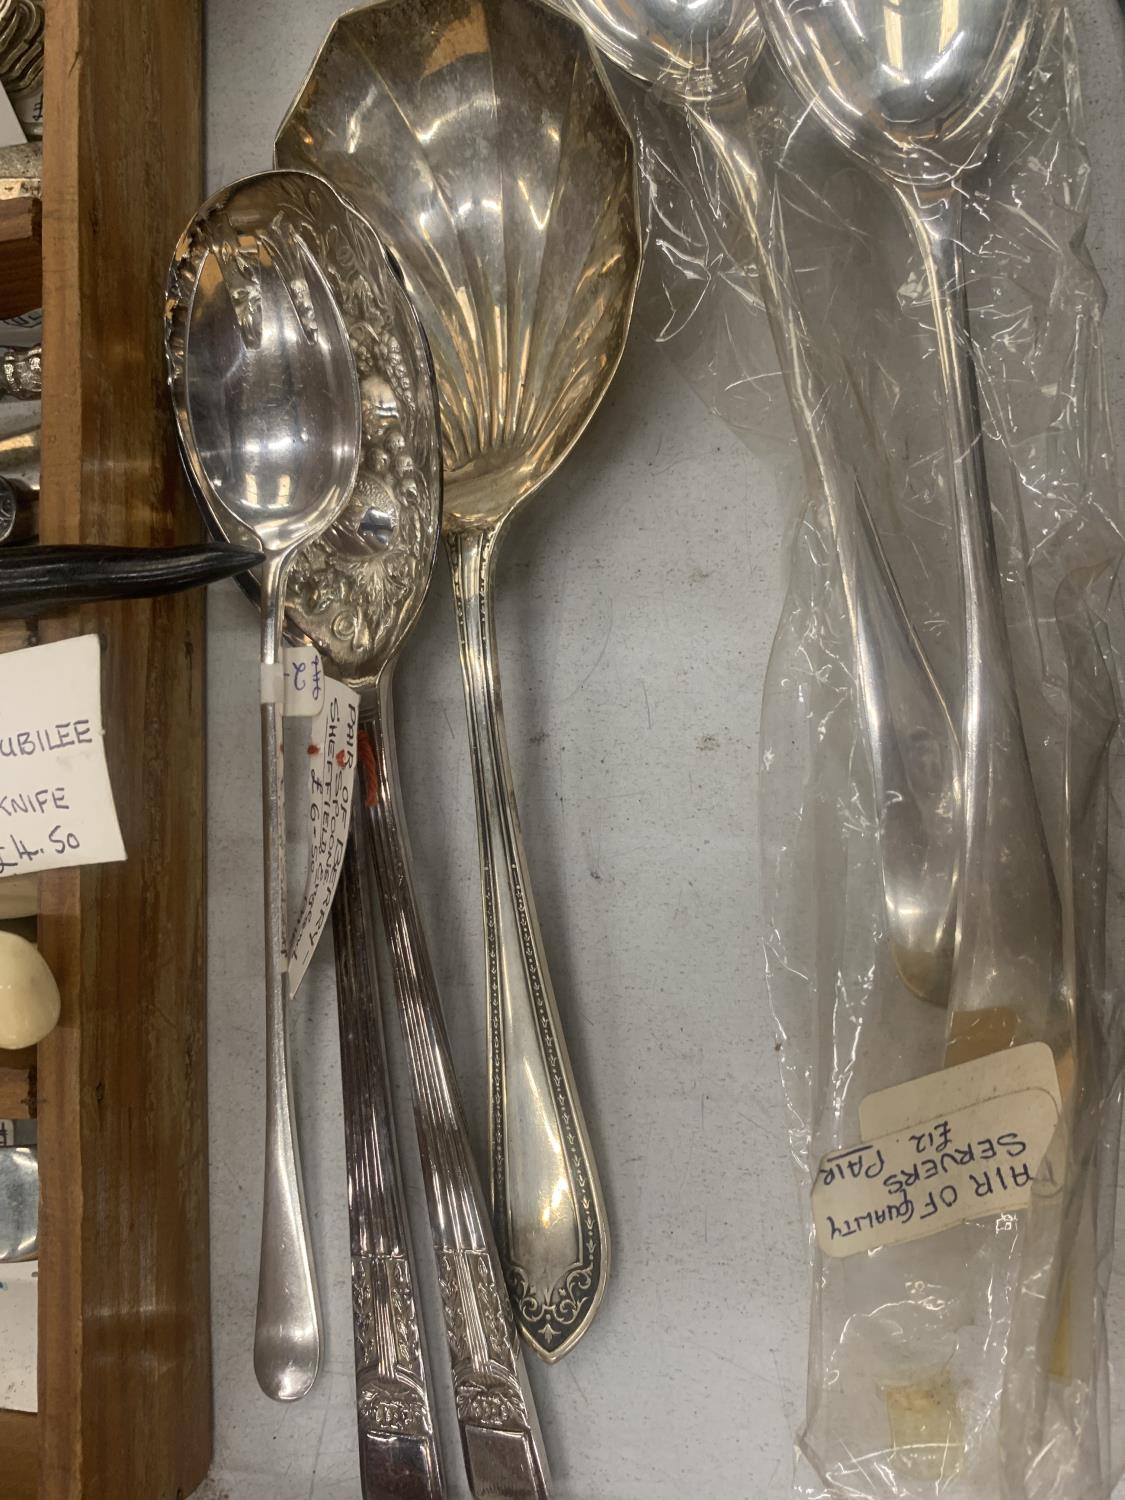 A LARGE QUANTITY OF VINTAGE FLATWARE TO INCLUDE BERRY SPOONS, SUGAR TONGS, CADDY SPOONS, SUGAR - Image 2 of 4